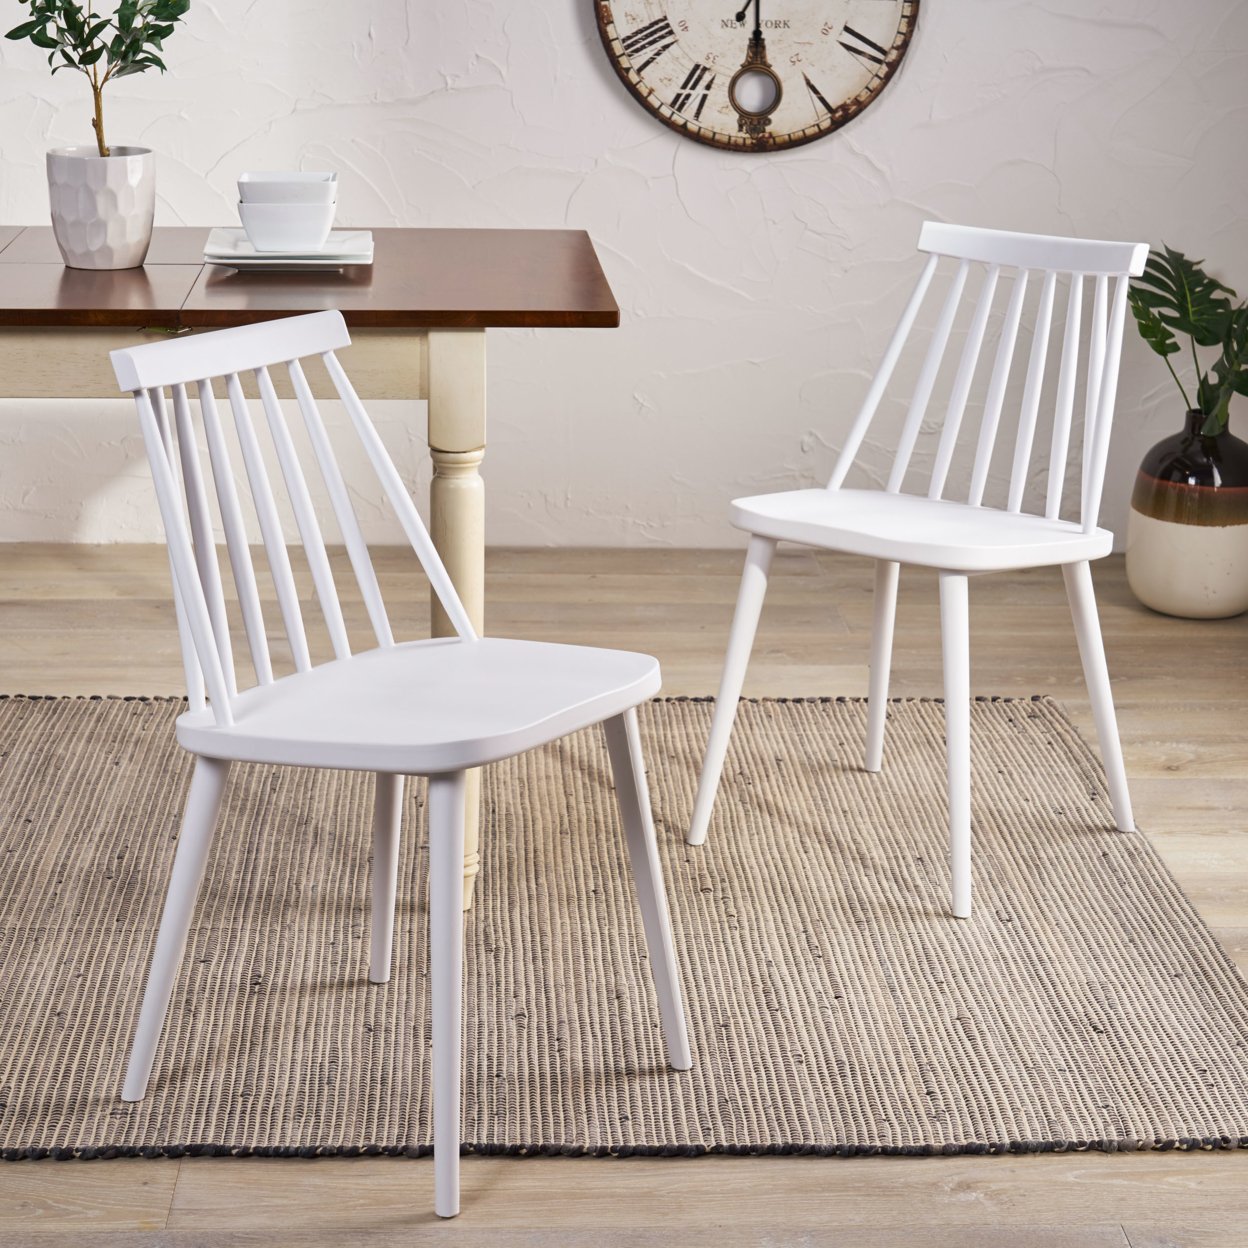 Phoebe Hume Farmhouse Spindle-Back Dining Chair (Set Of 2) - White